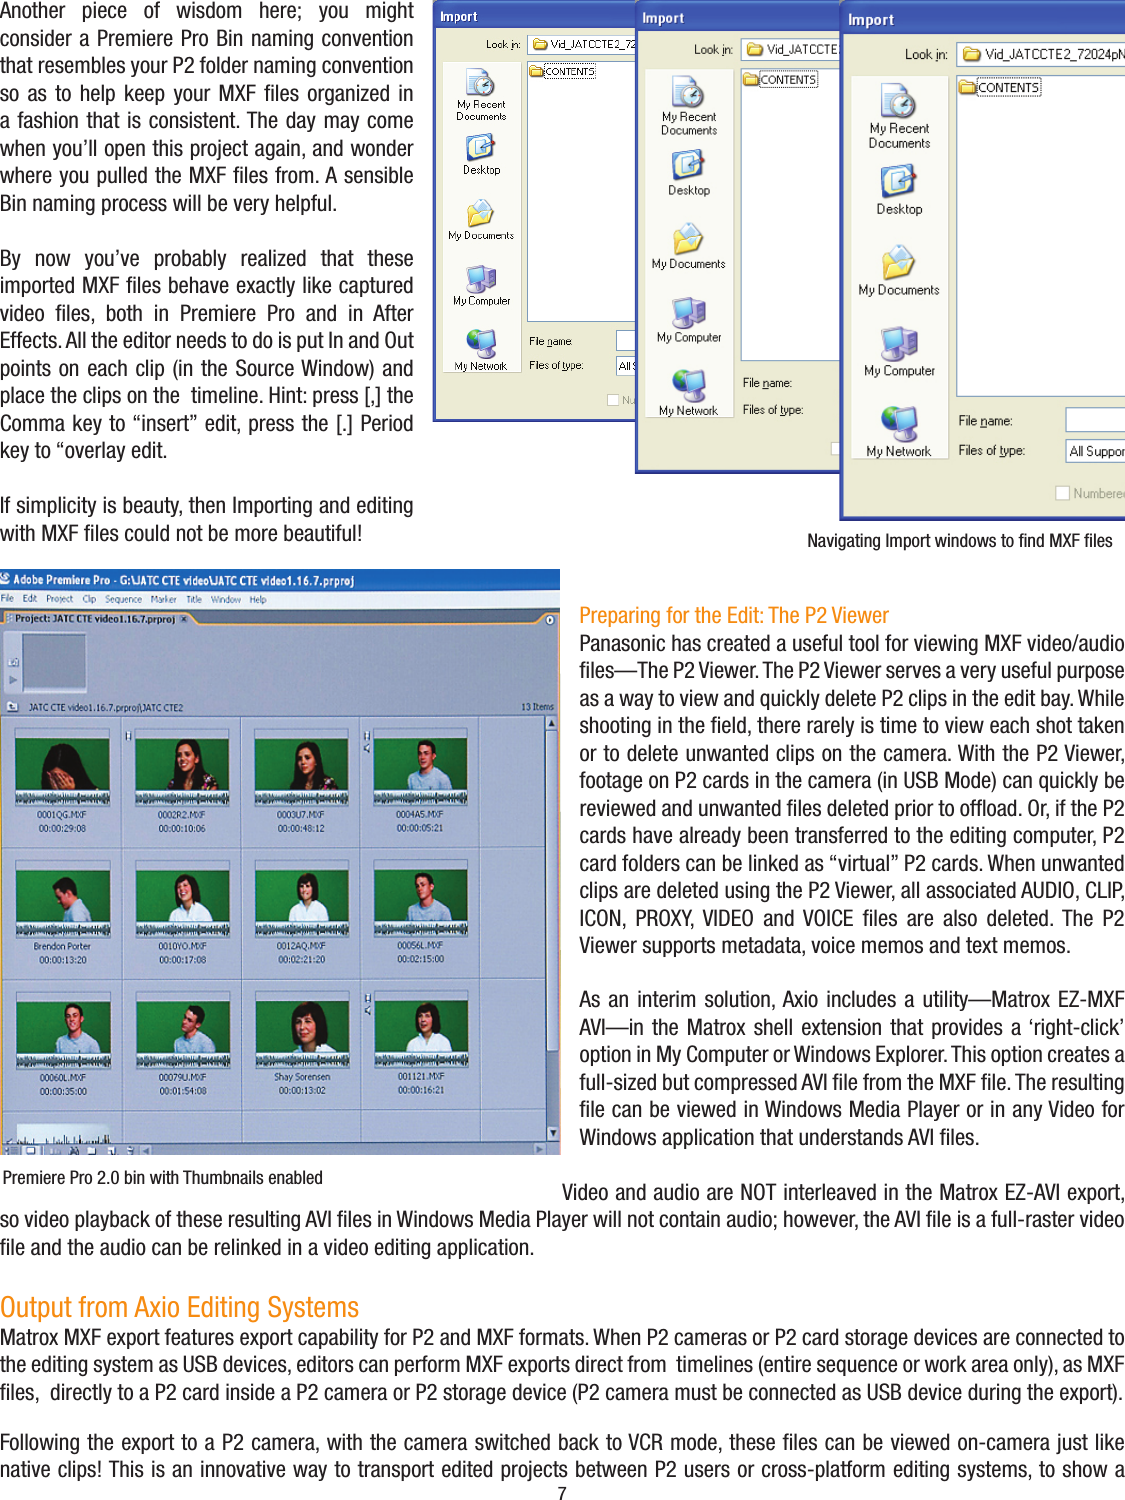 Page 7 of 9 - Panasonic  If Not Then WP P2Workflow Matrox